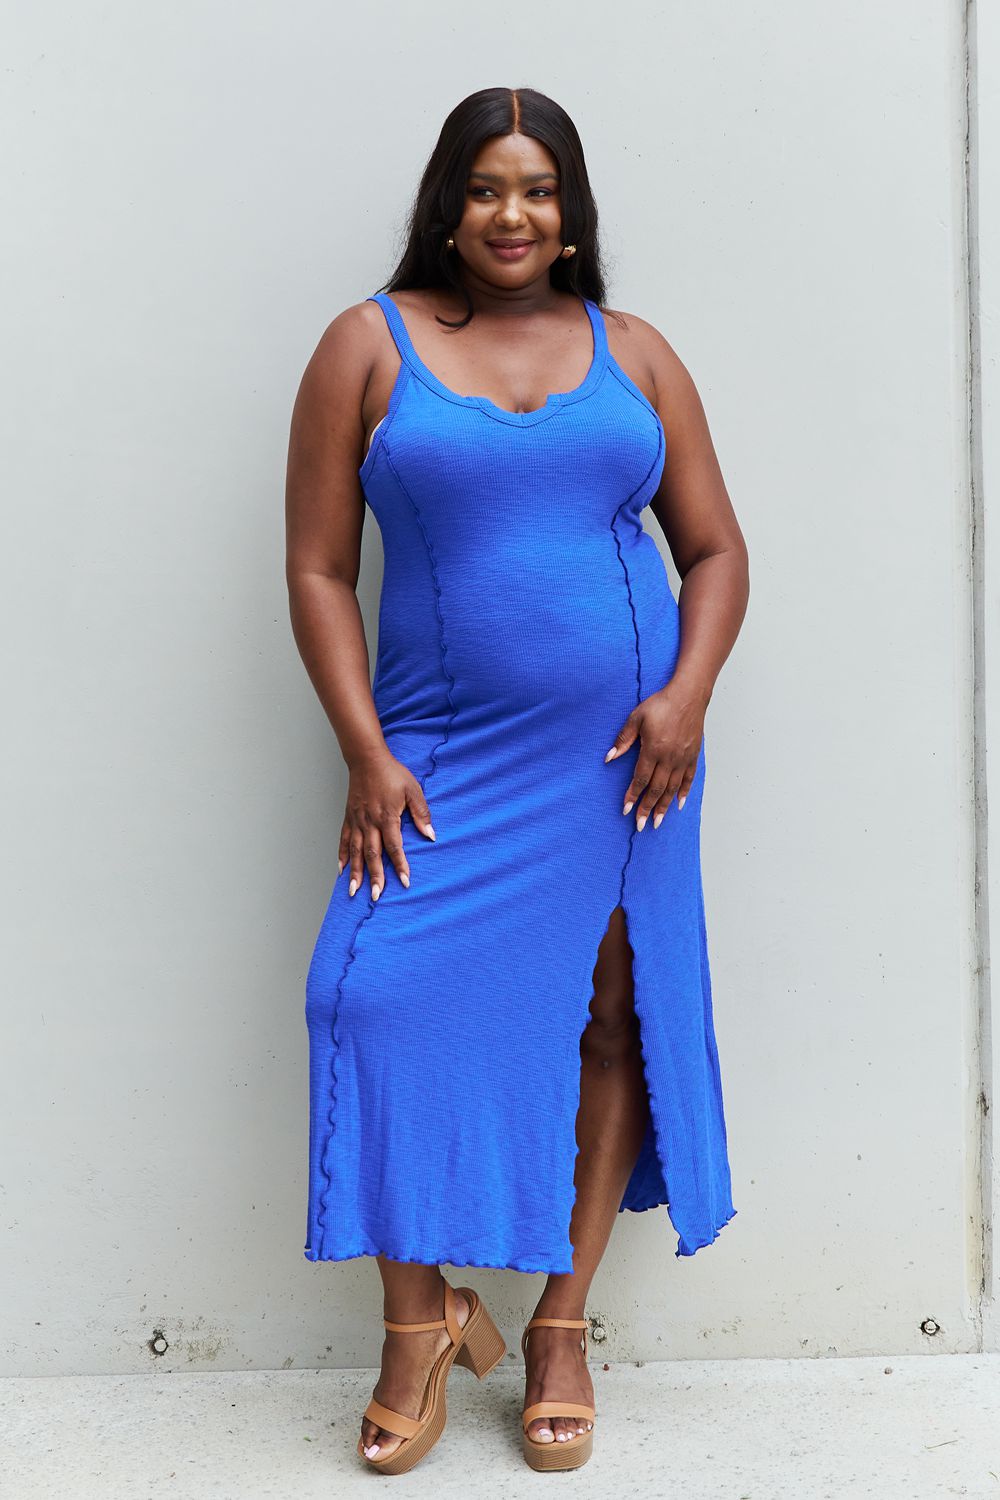 swvws Culture Code Look At Me Full Size Notch Neck Maxi Dress with Slit in Cobalt Blue